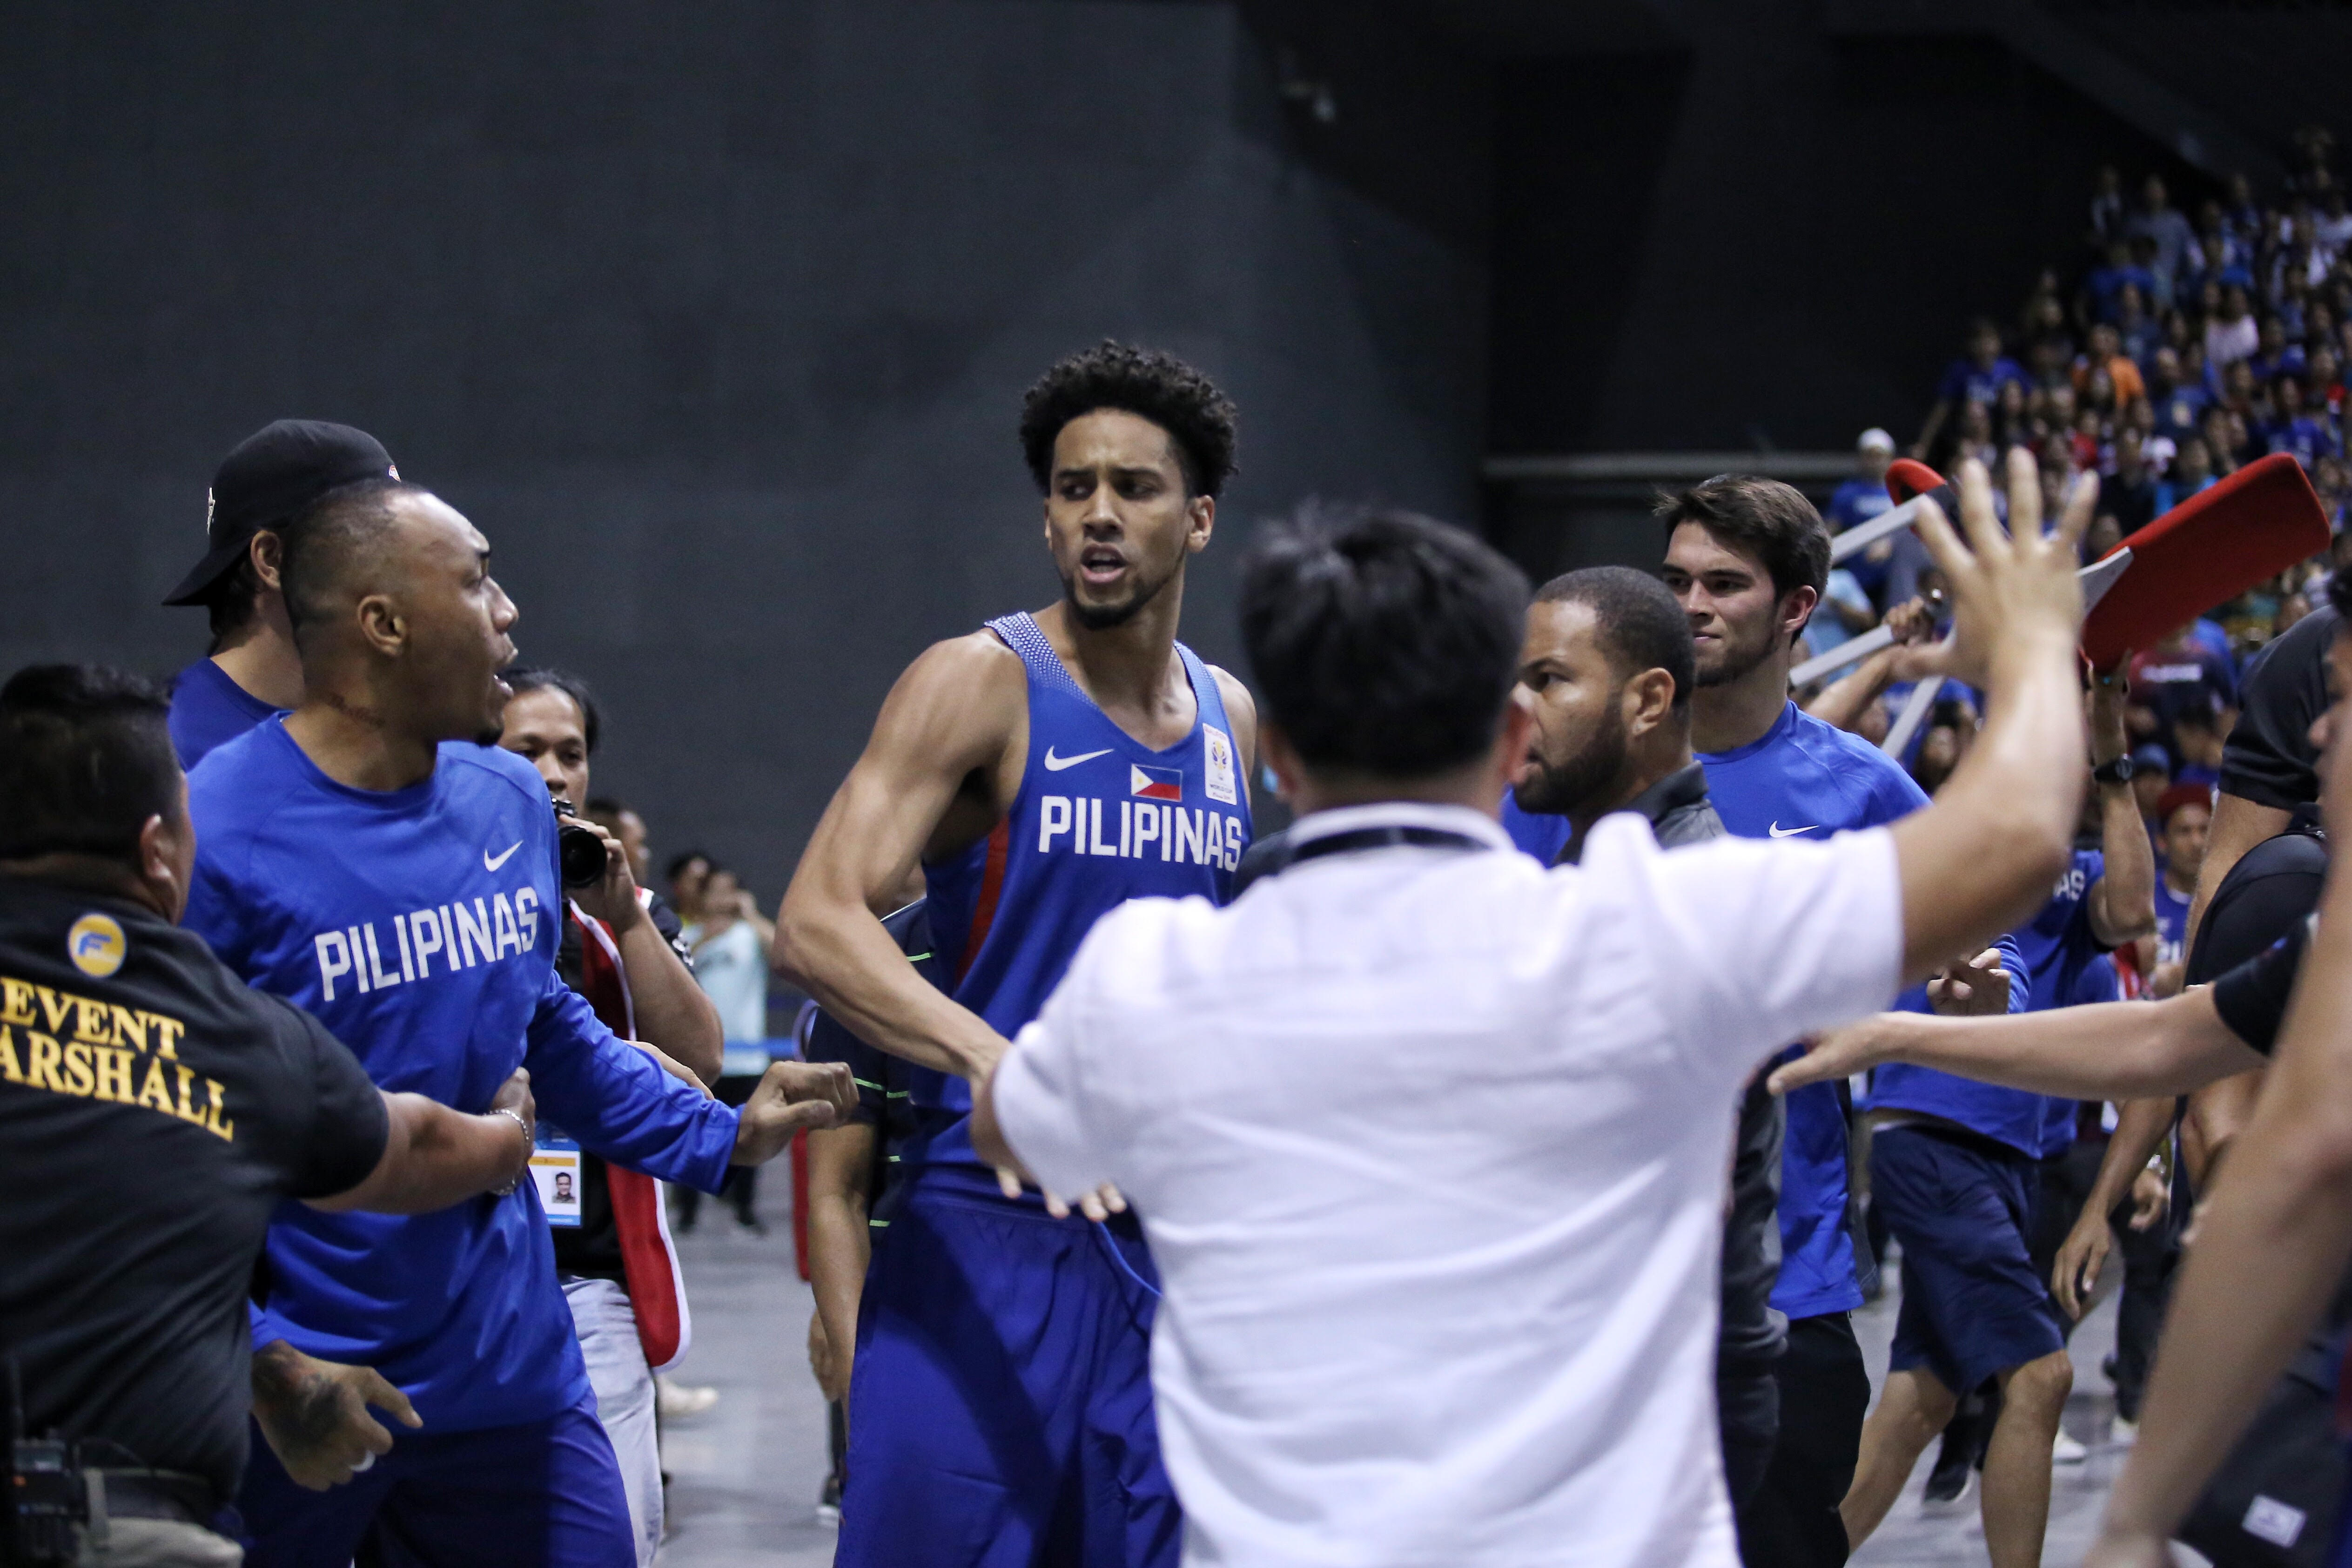 Brawl breaks out in Gilas-Australia game | Inquirer Sports